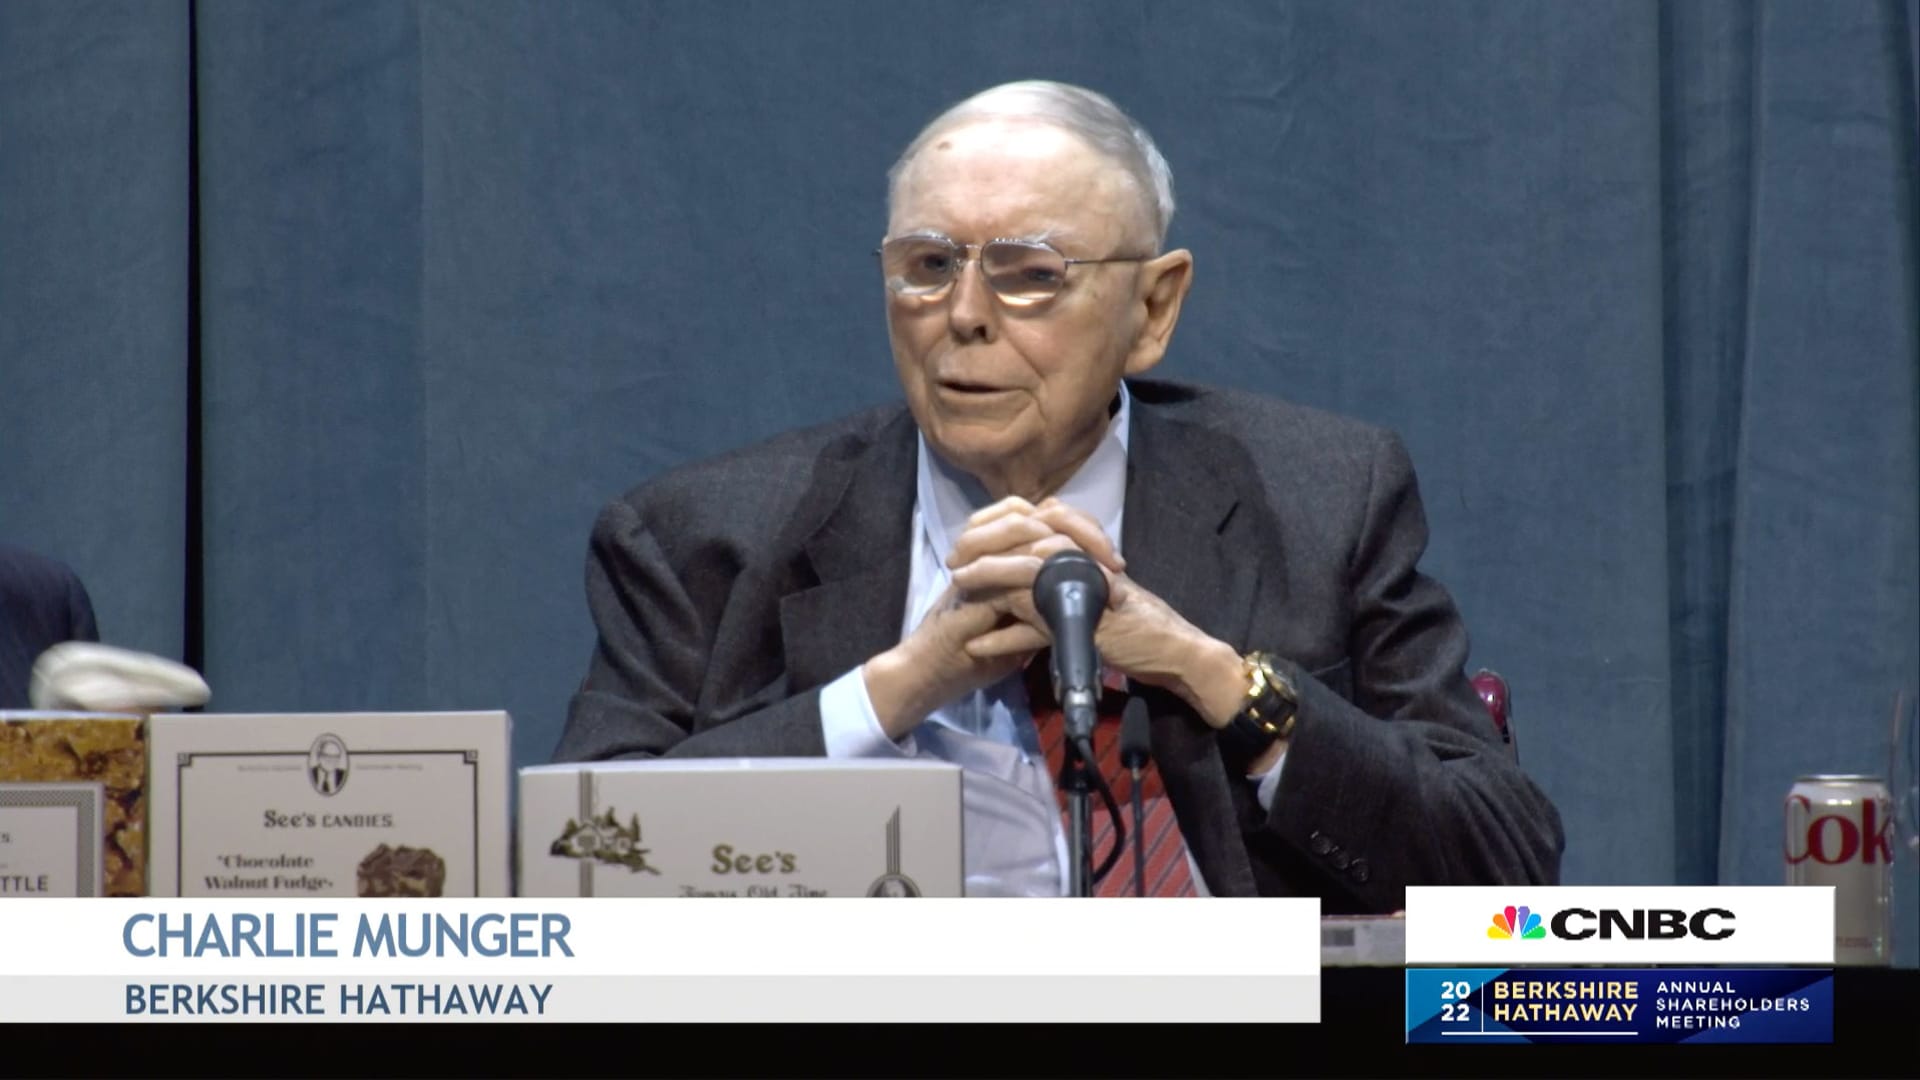 Charlie Munger believes Berkshire's investments in fossil fuels and renewables can both work